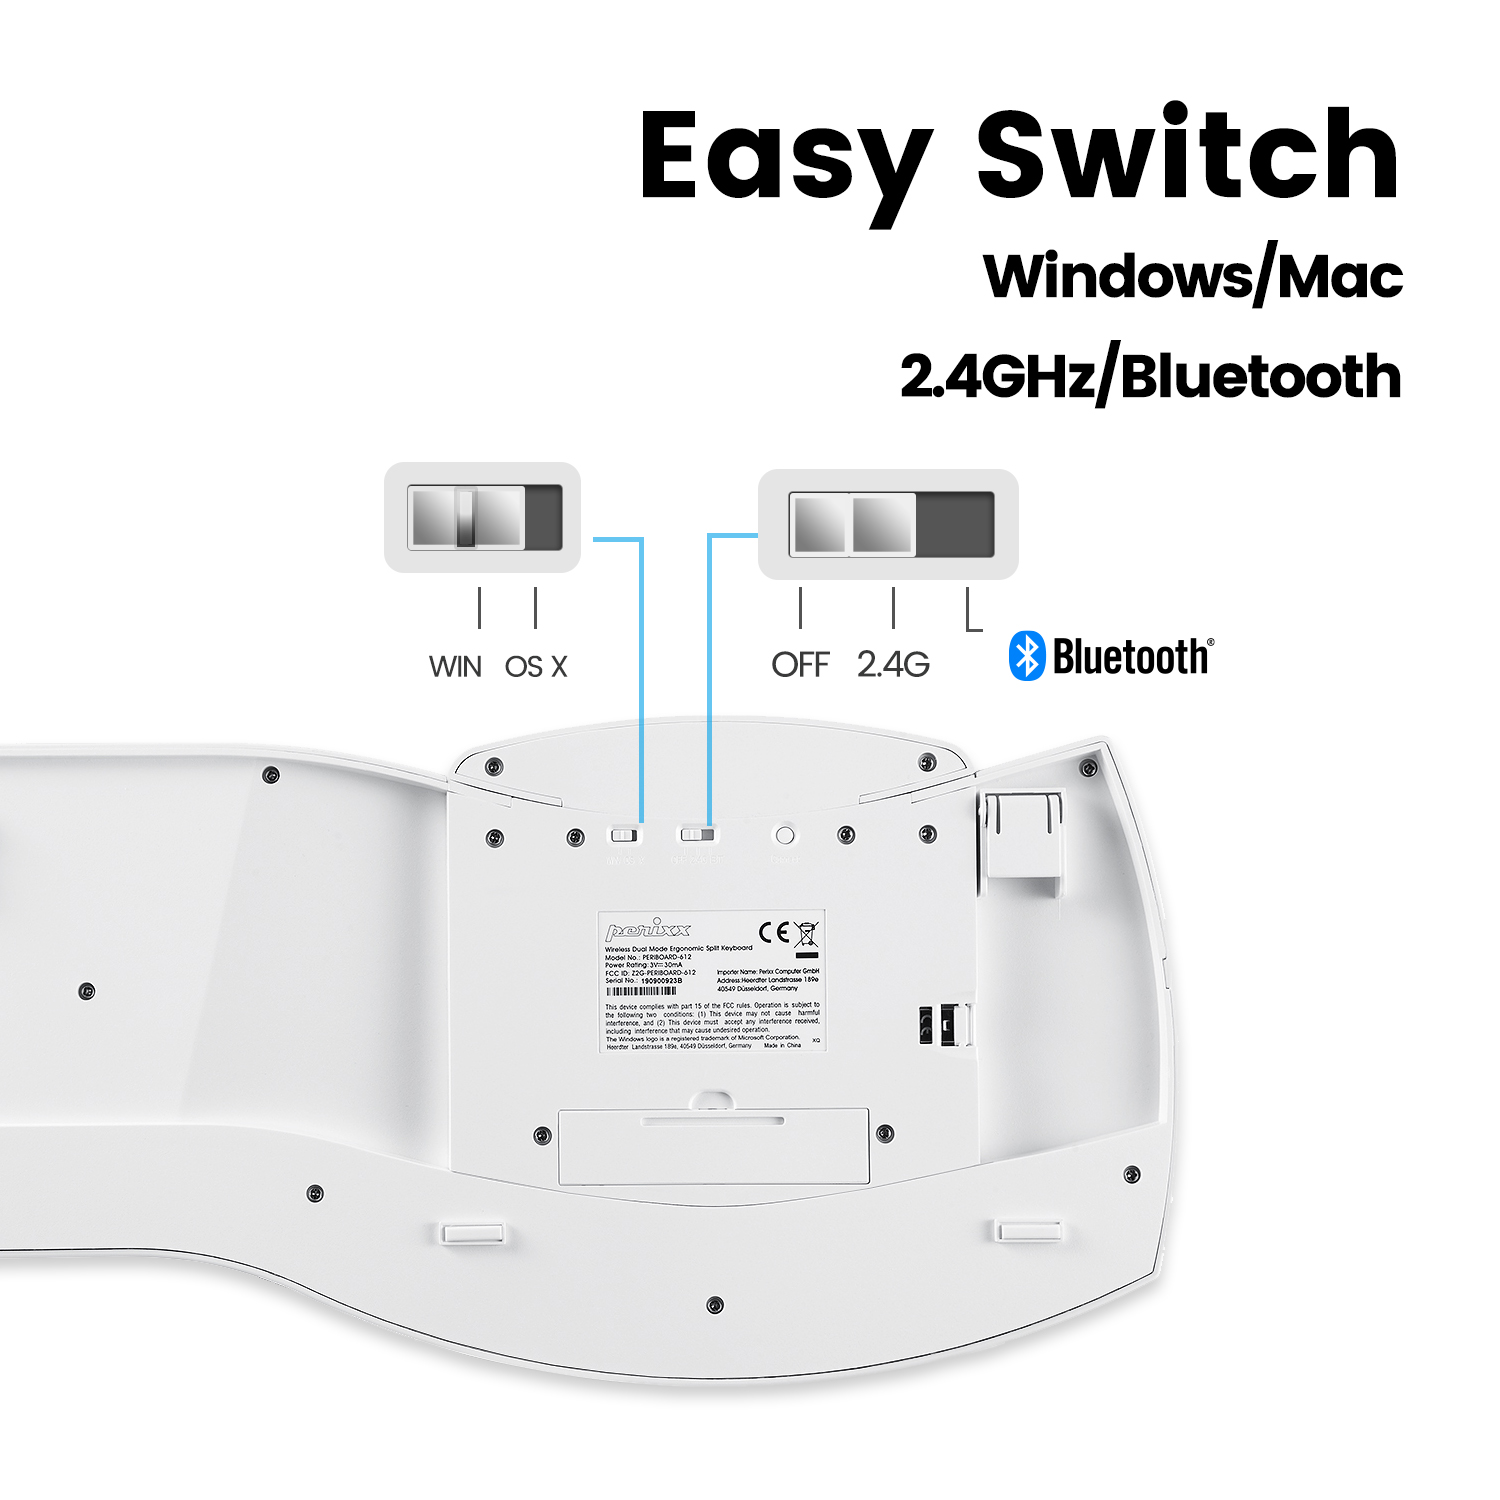 Dual Mode between 2.4GHz and Bluetooth 4.0